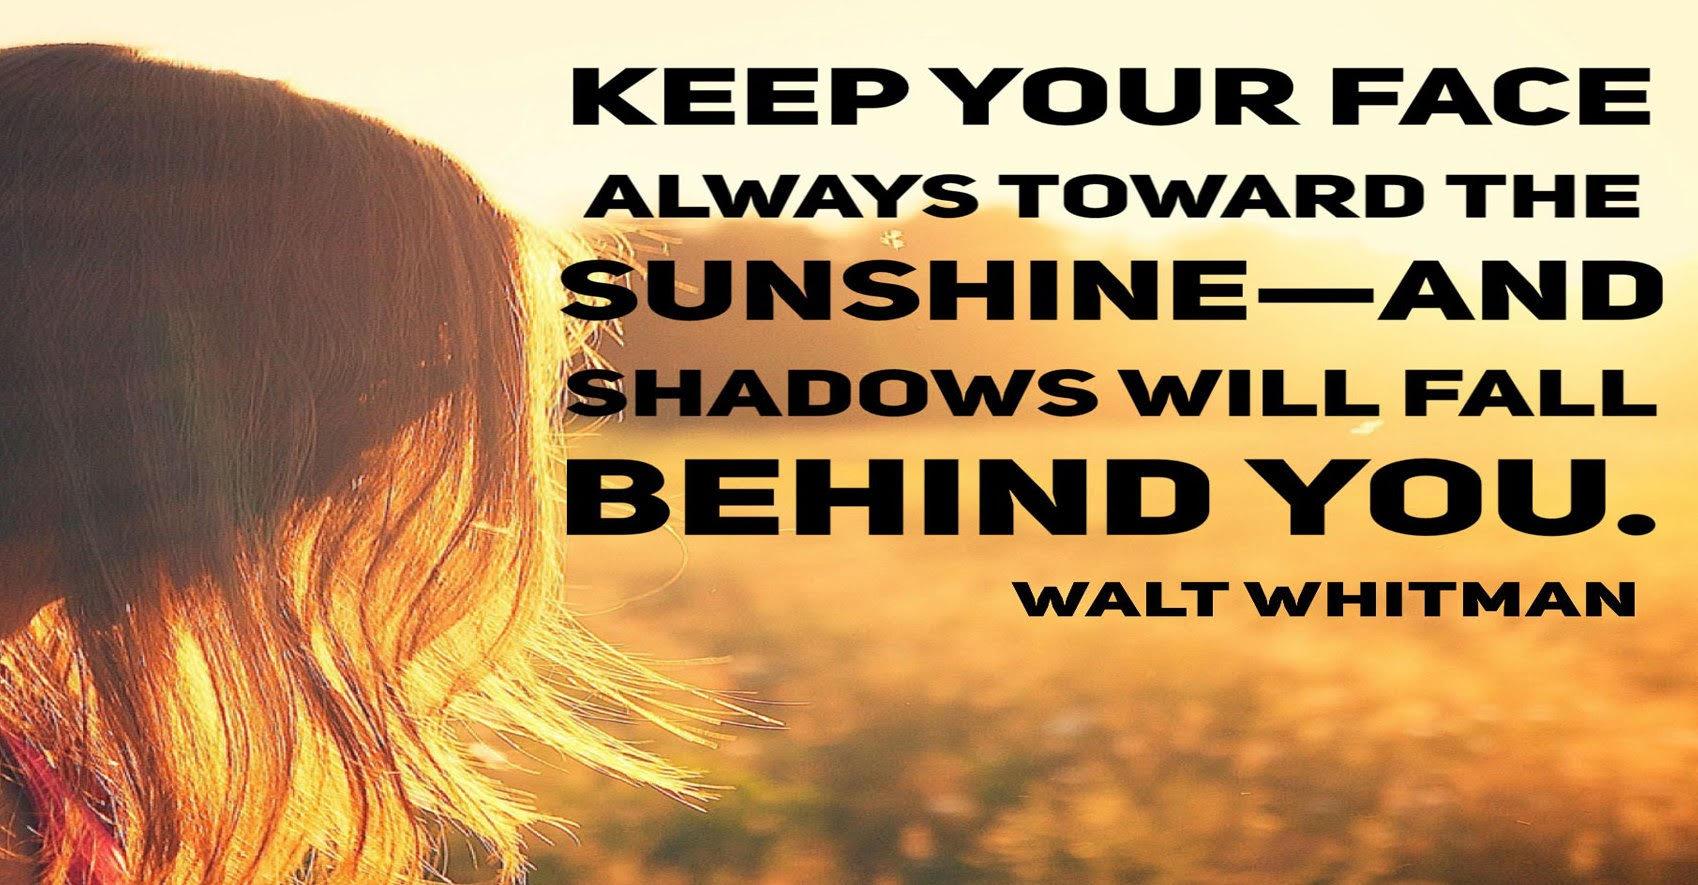 keep your face always toward the sunshine- and shadows will fall behind you